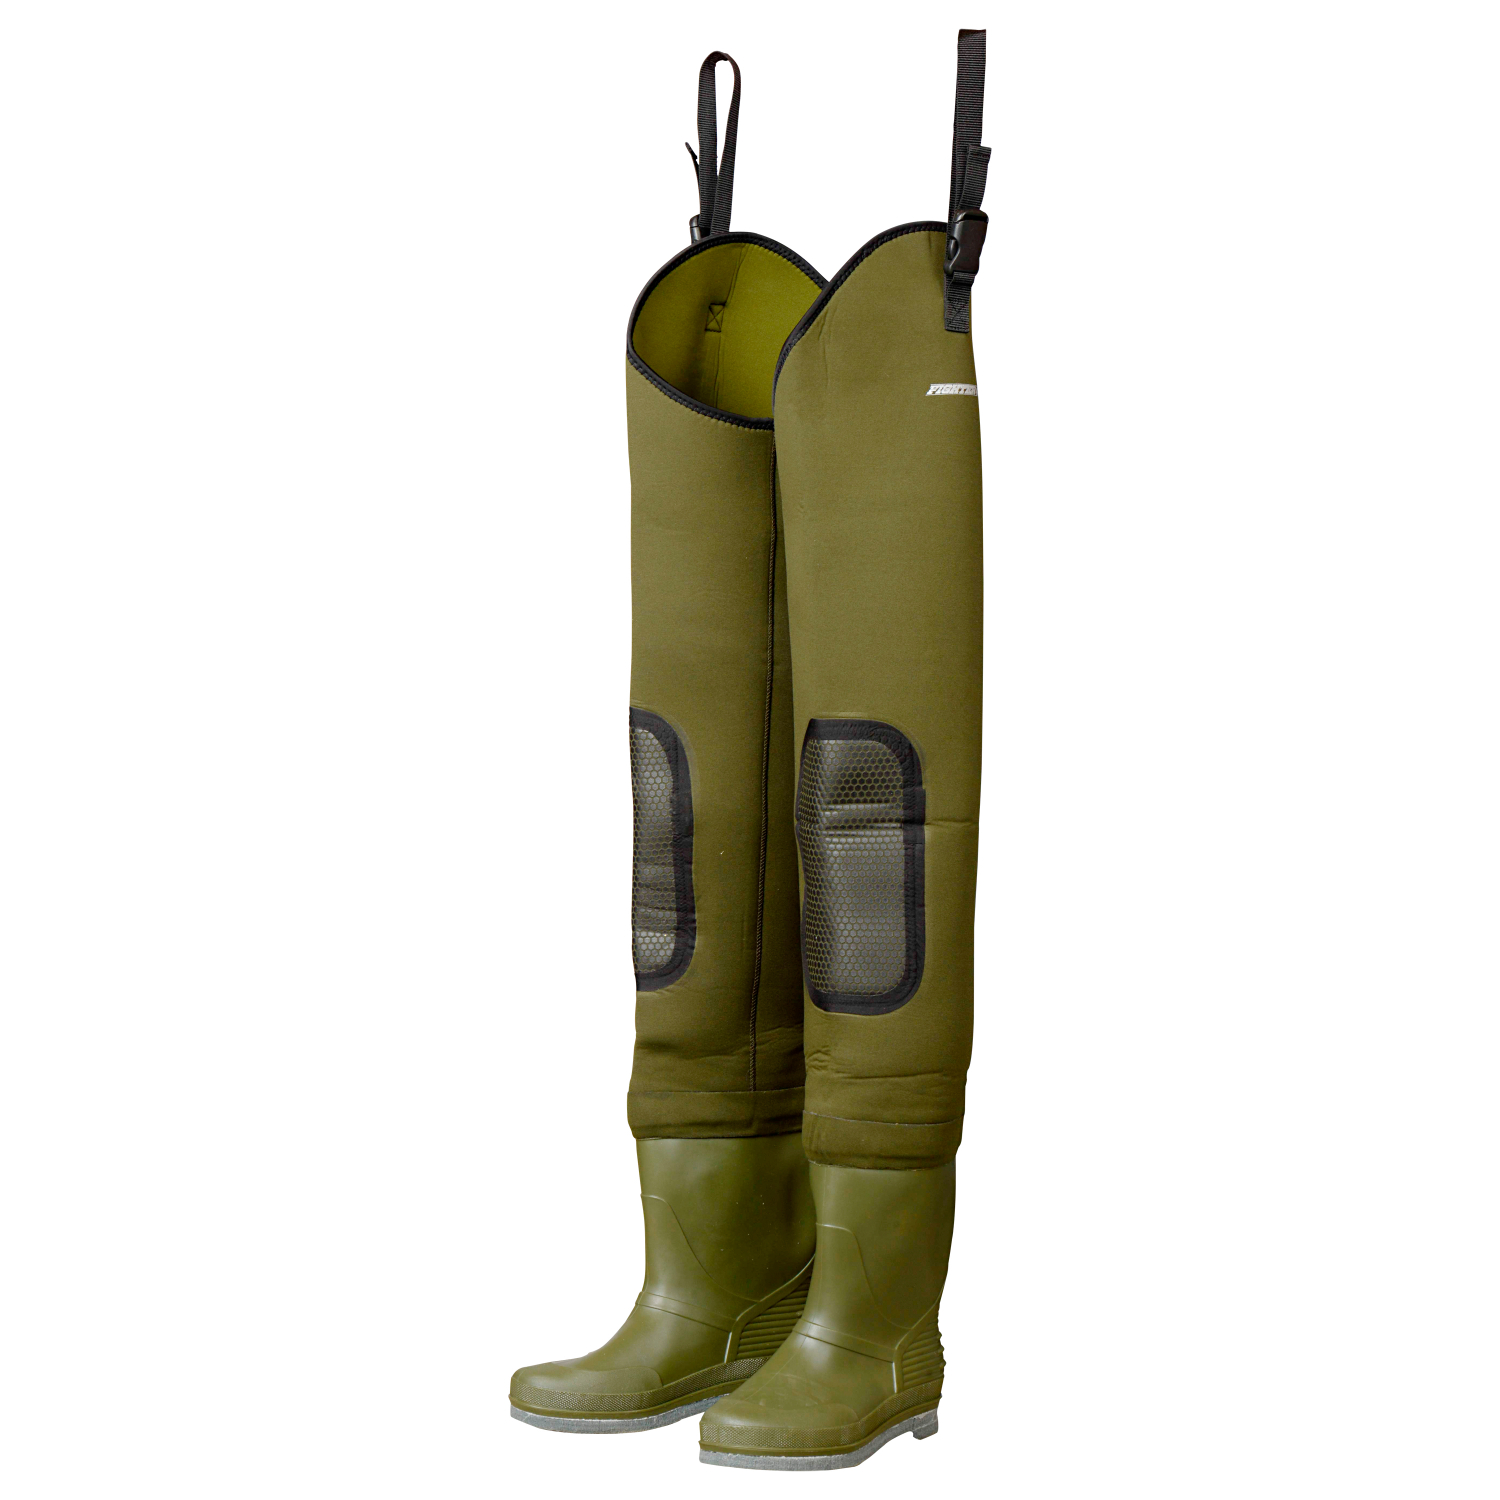 DAM DAM Fighter Pro+ Hip Neoprene Wader - Cleated Sole 